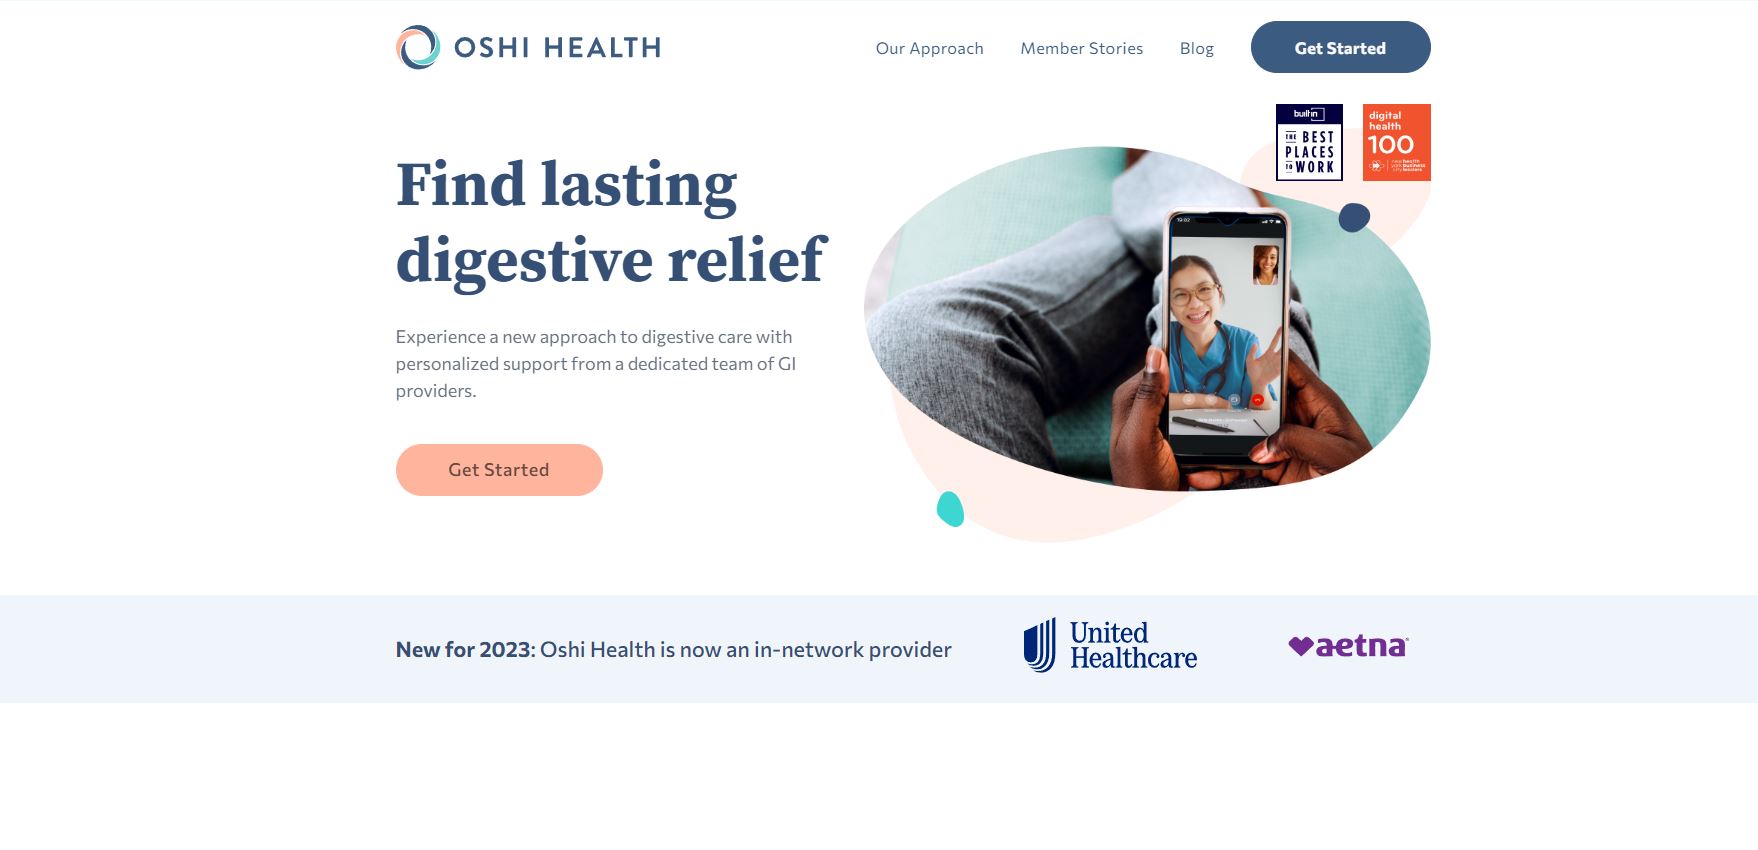 With $30M in Series B funding from top investors, Oshi Health has buil